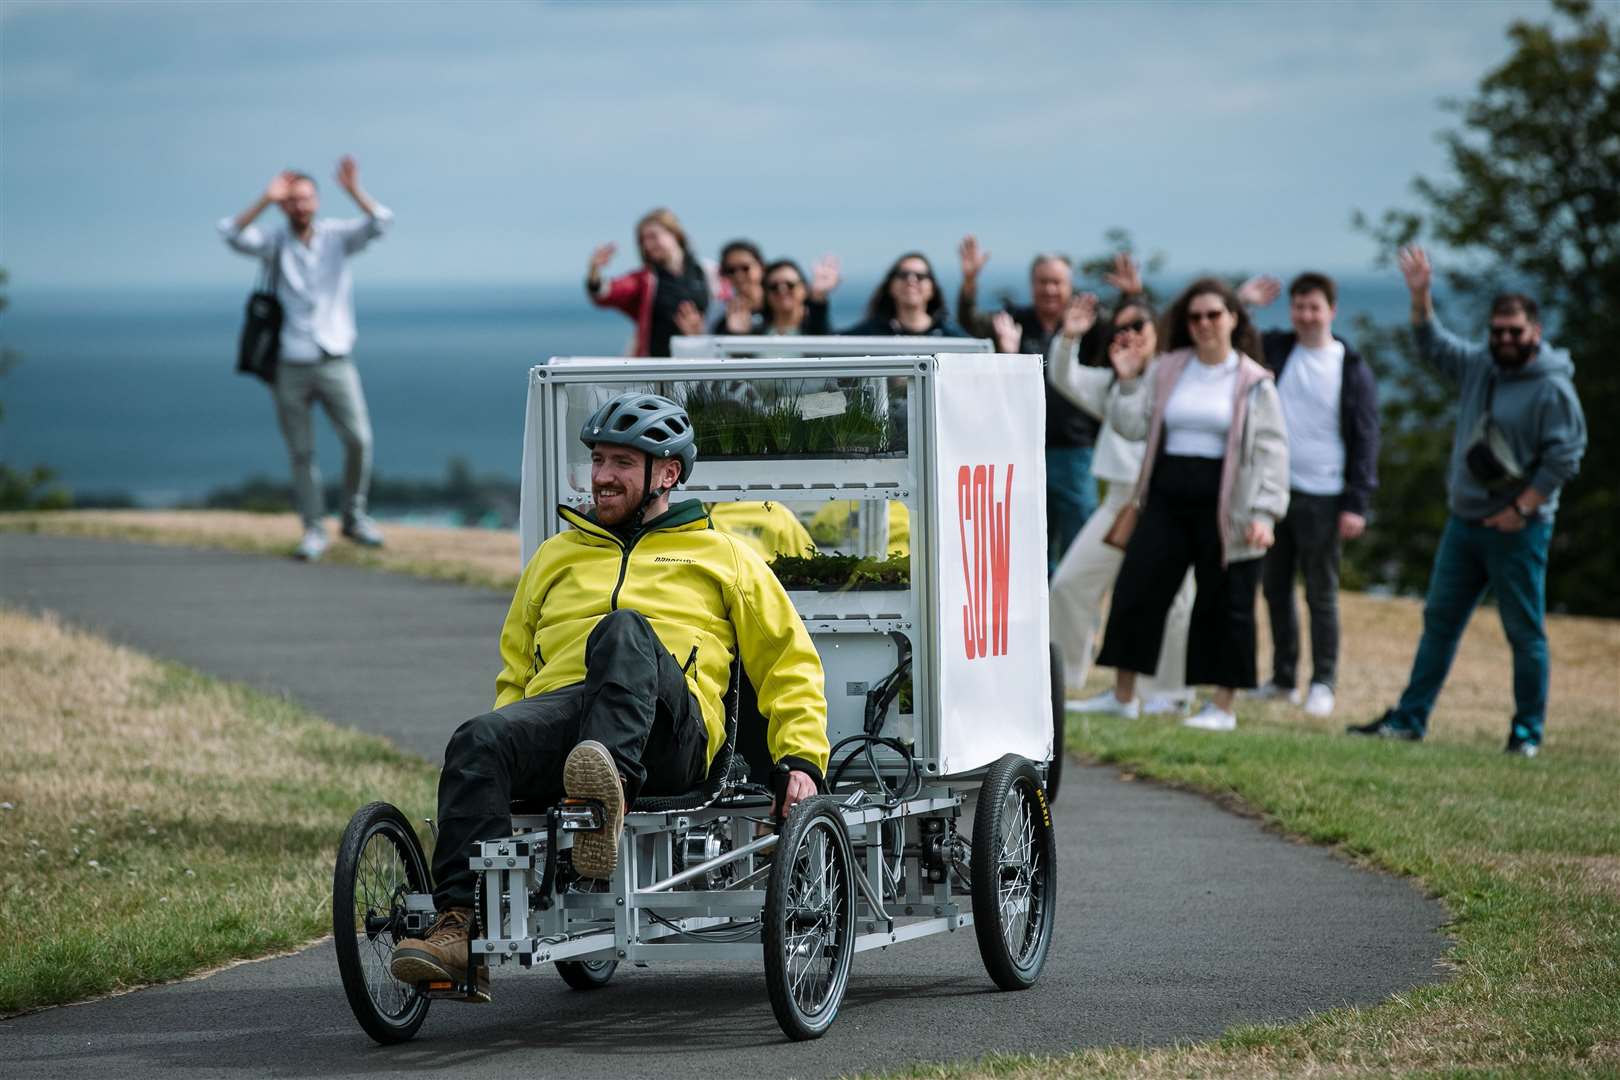 The cargo bikes carrying Dandelion’s unique growing cubes begin their tour of Scotland at the top of Calton Hill in Edinburgh. Picture: Andrew Cawley.